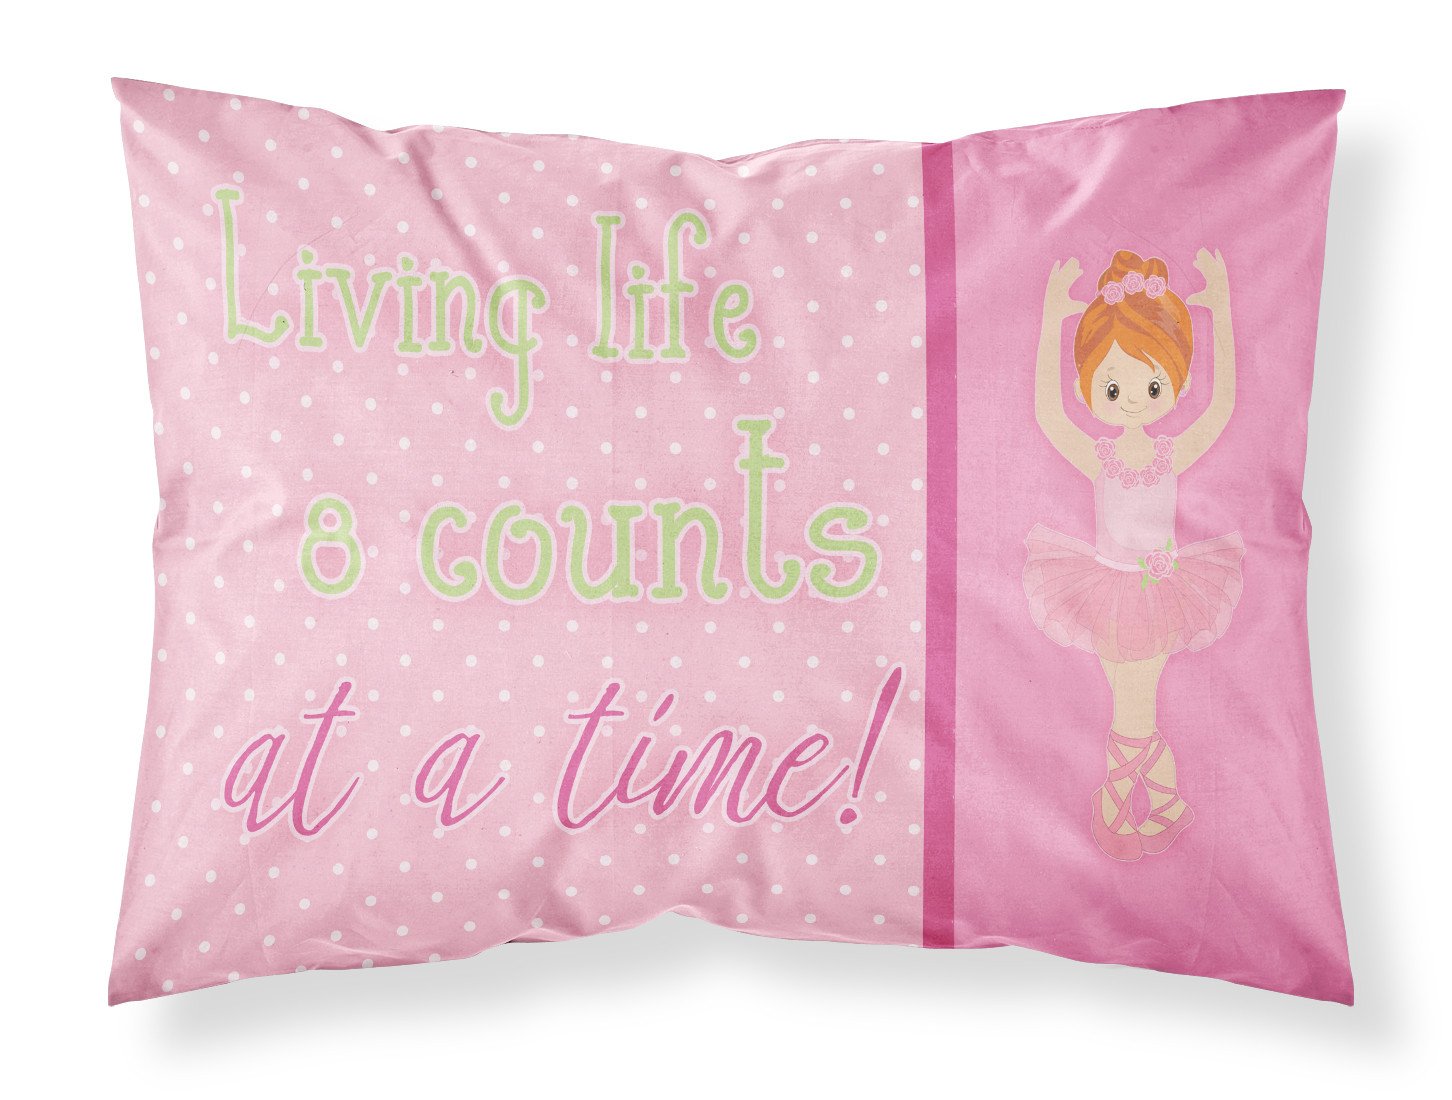 Ballet in 8 Counts Red Hair Fabric Standard Pillowcase BB5398PILLOWCASE by Caroline's Treasures